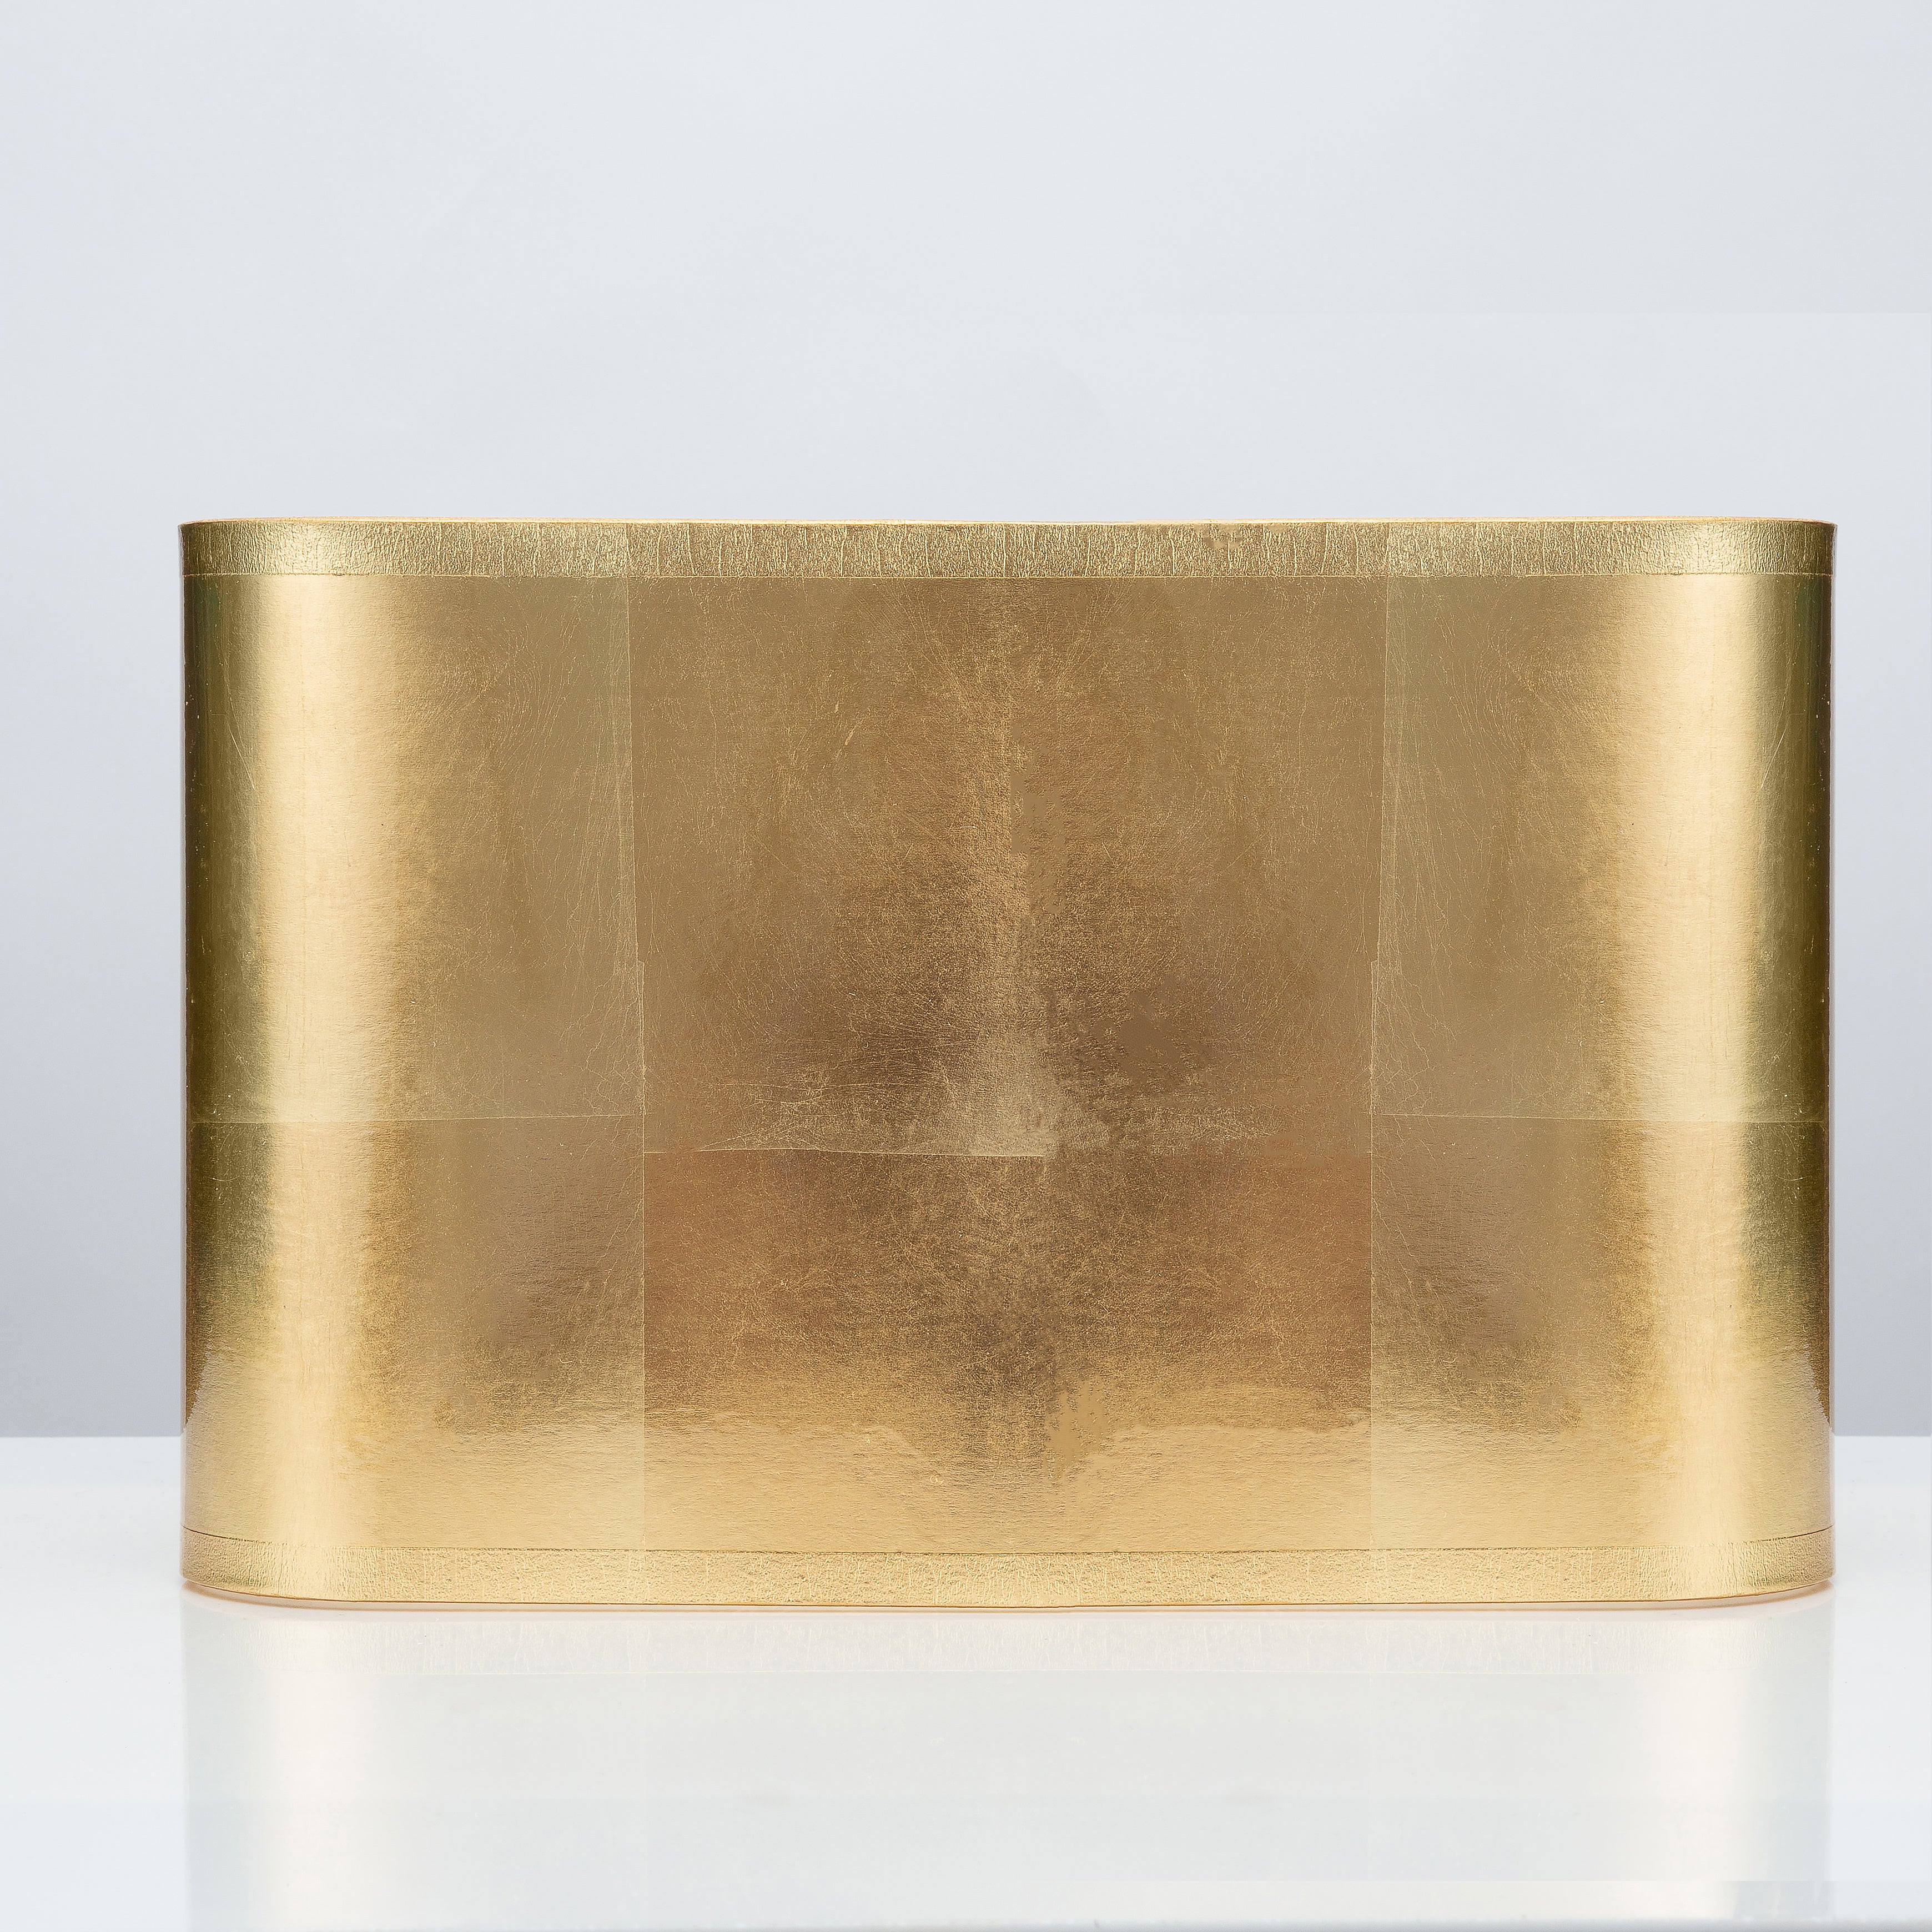 Rectangular Gold Foil Lamp Shade 14/9 x 14/9 x 9" - Couture Lamps